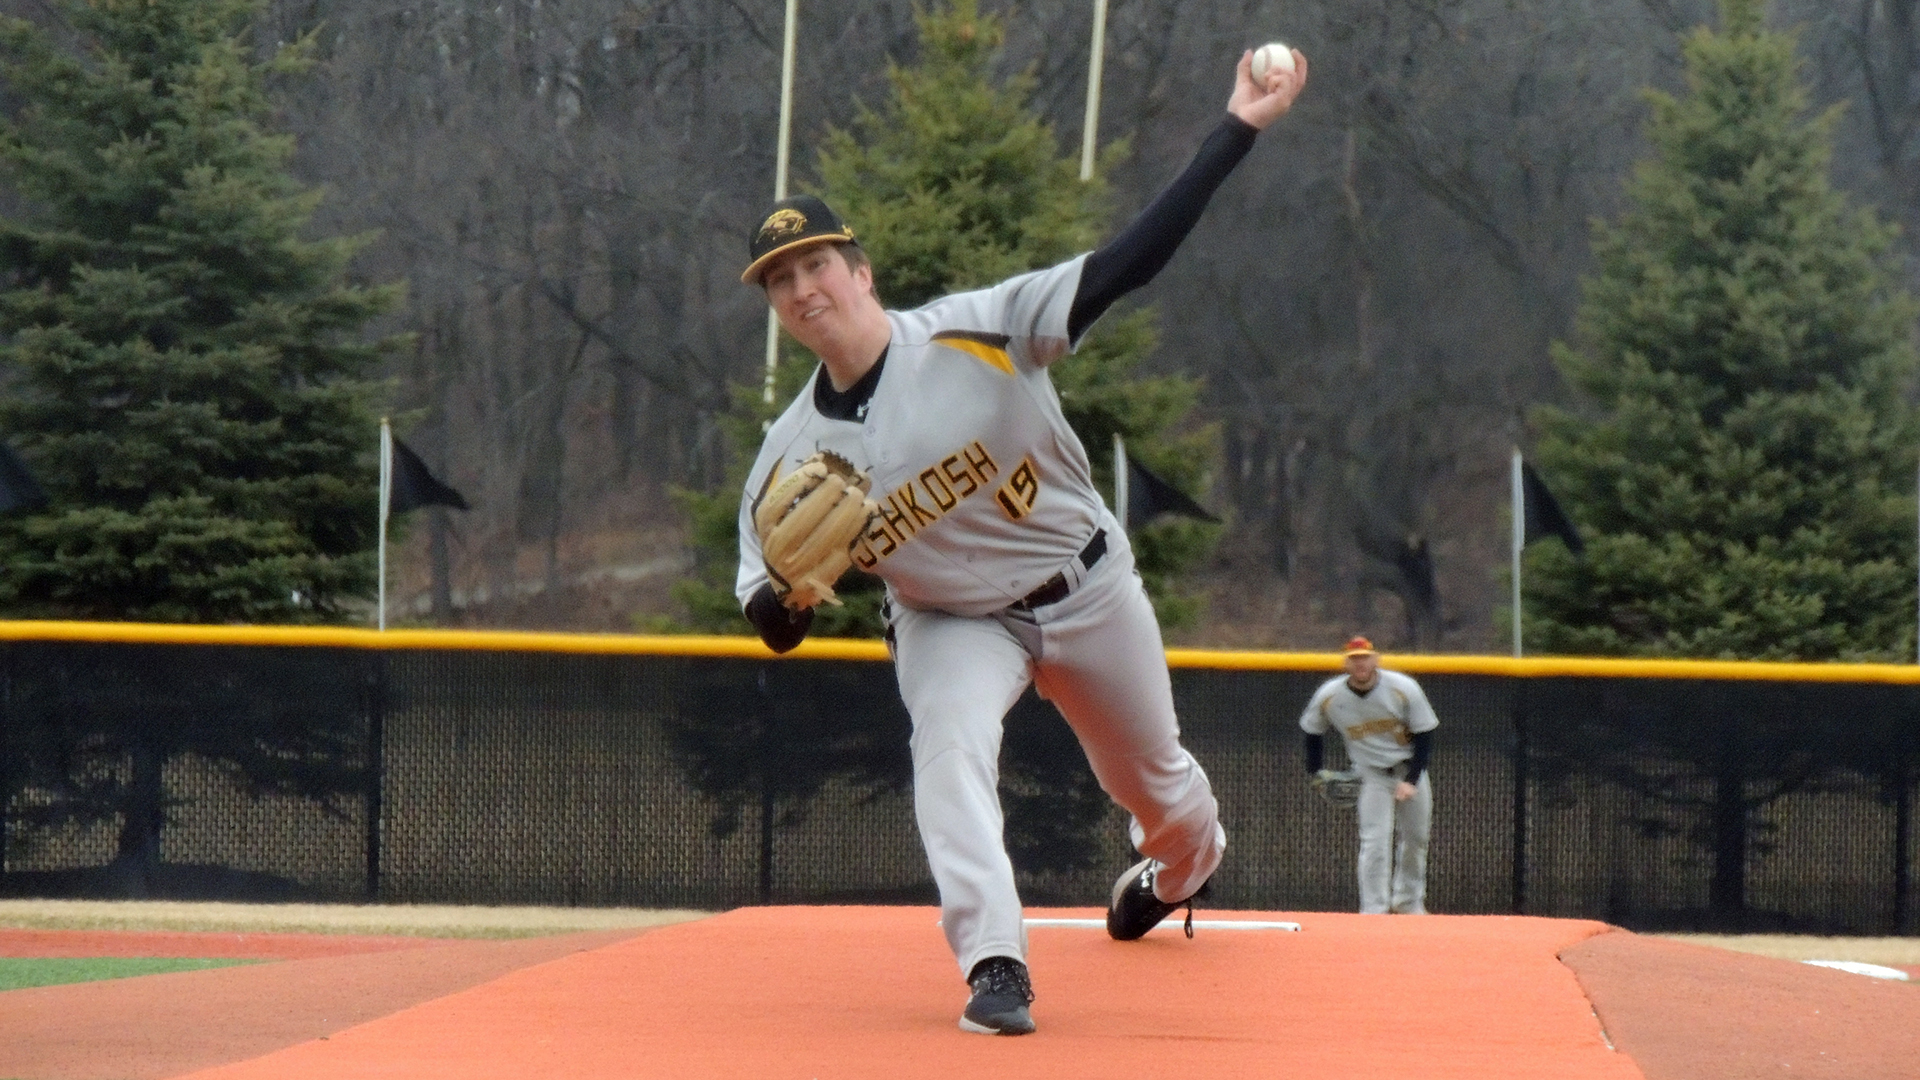 Connor Brinkman pitched a complete game as UW-Oshkosh earned its first shutout victory over UW-Whitewater since 2009.